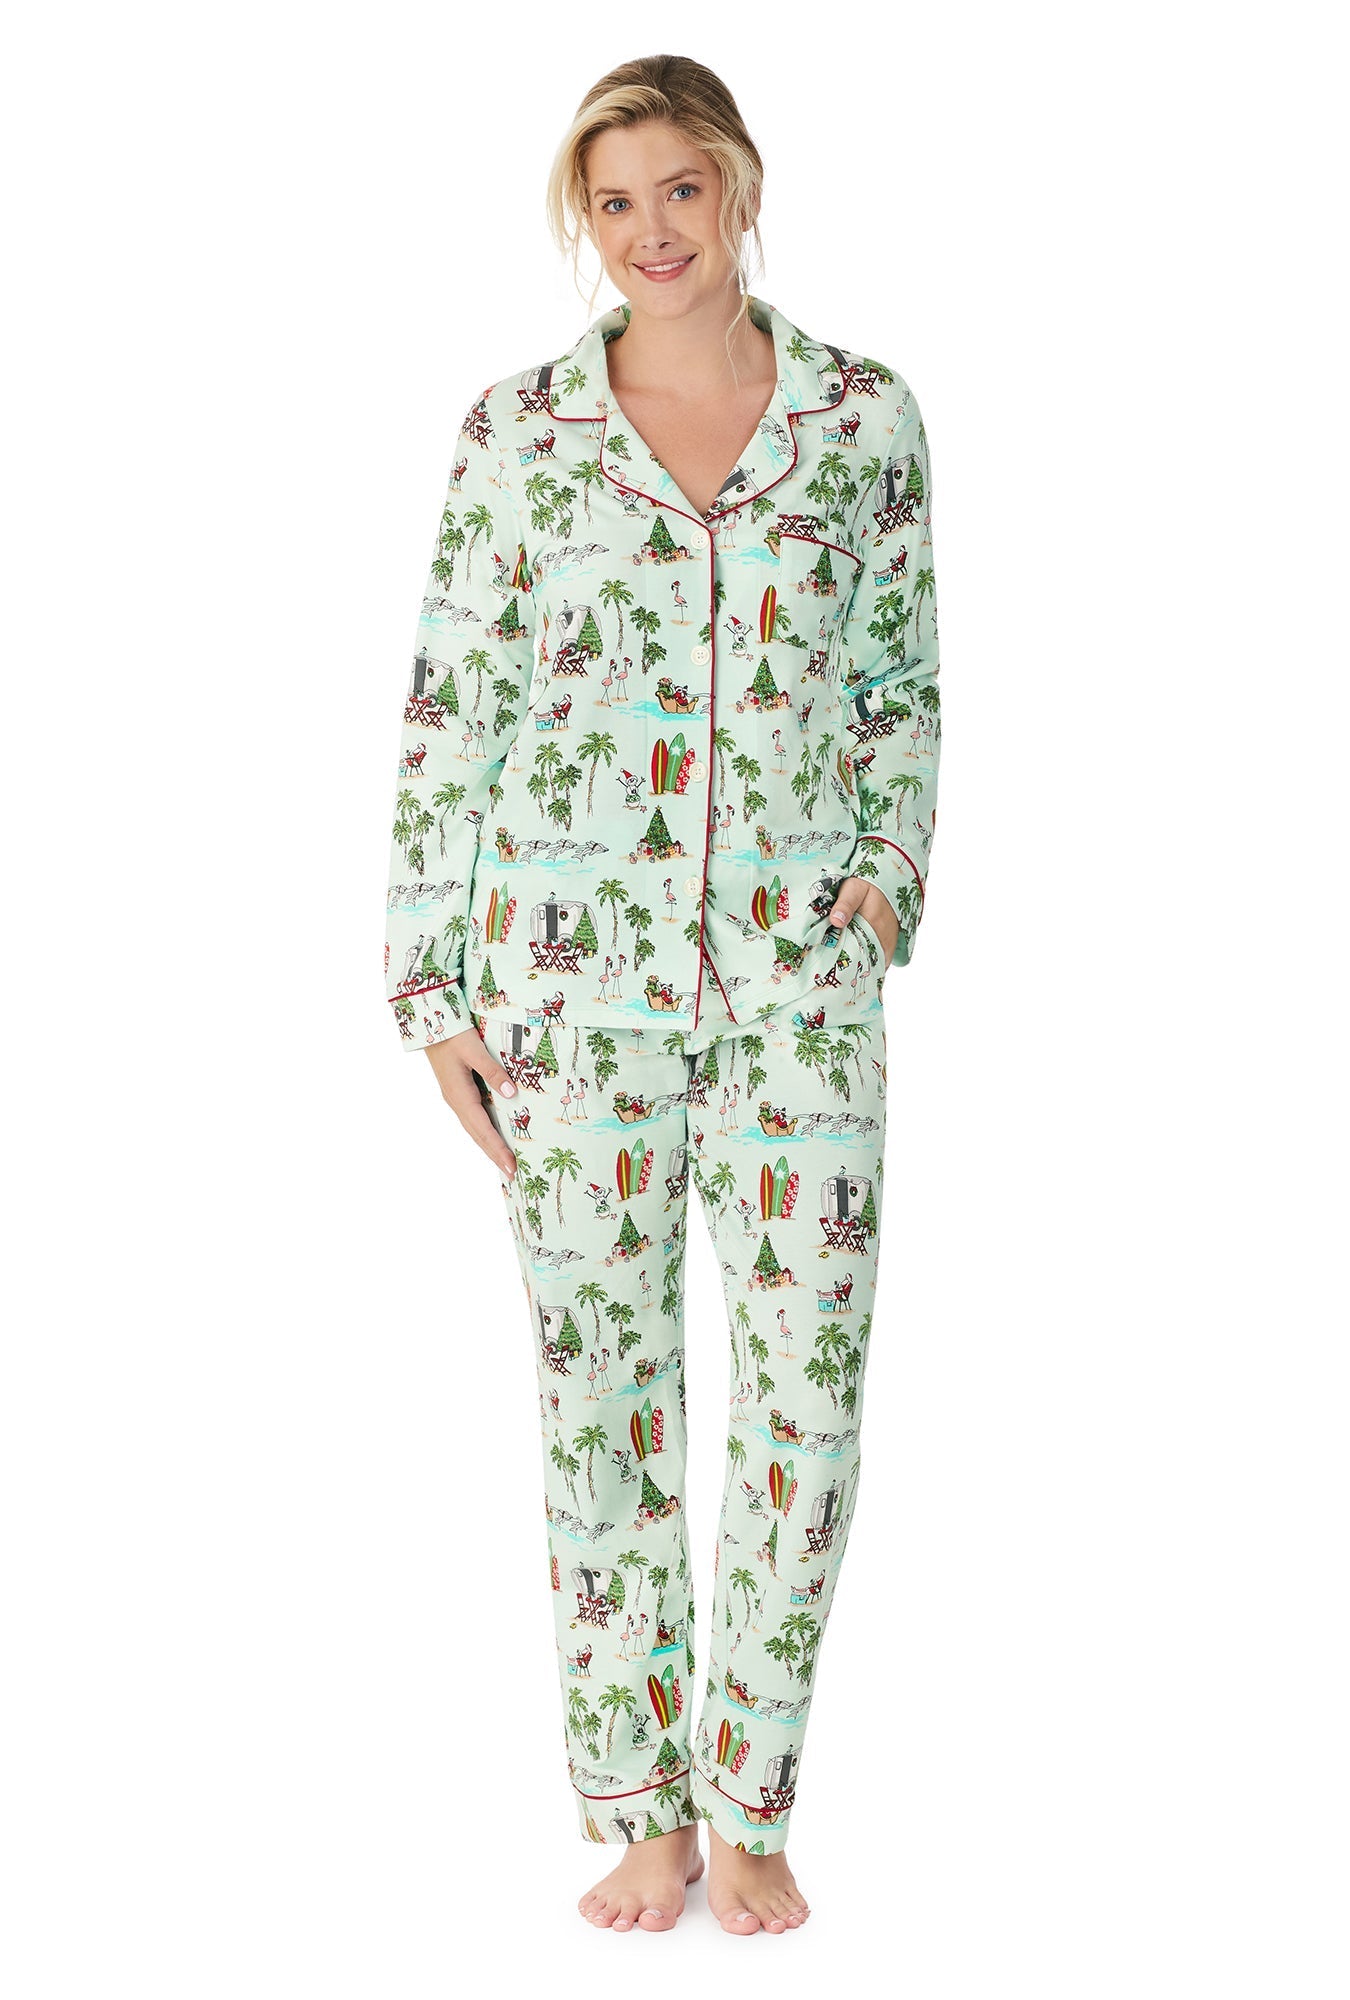 A lady wearing a green long sleeve pj set with beach pattern.